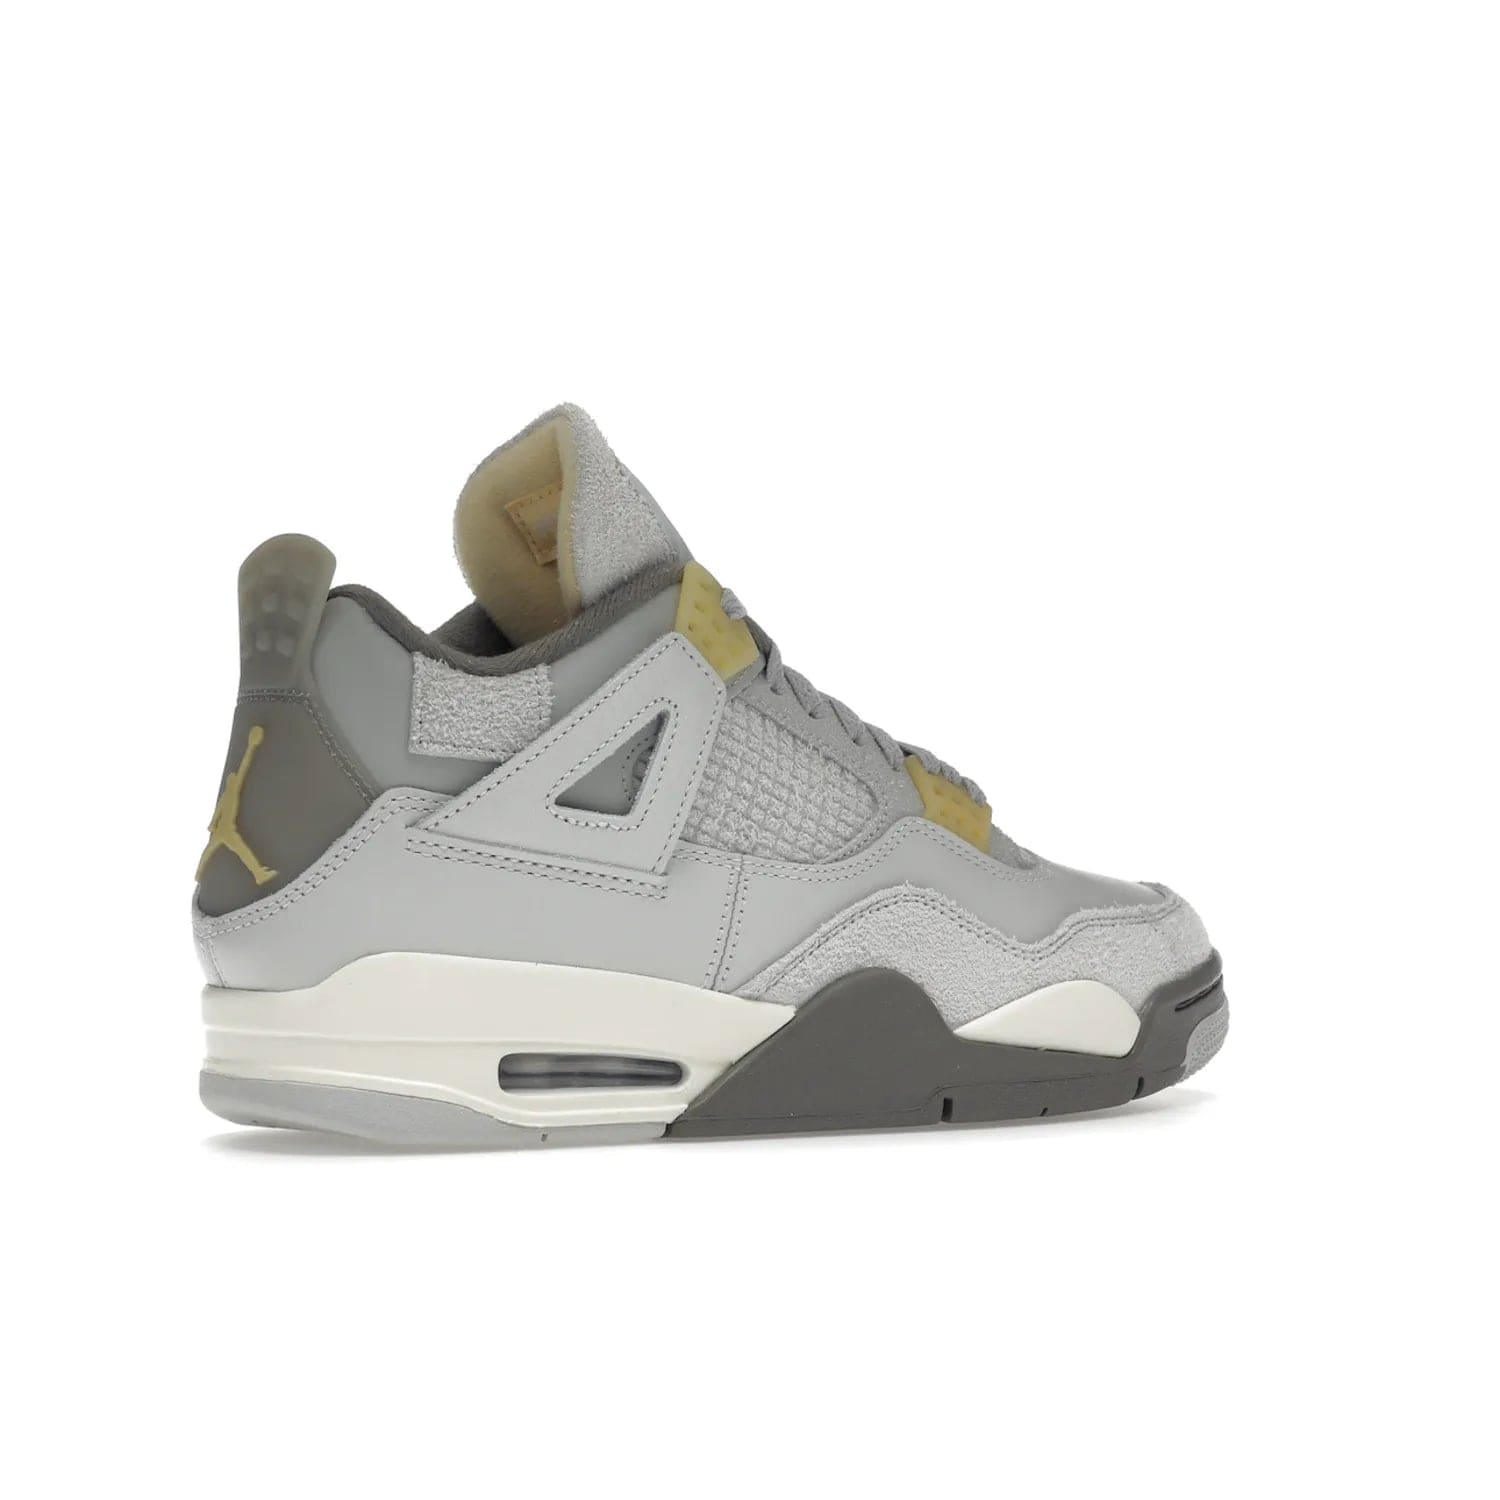 Jordan 4 Retro SE Craft Photon Dust - Image 34 - Only at www.BallersClubKickz.com - Upgrade your shoe collection with the Air Jordan 4 Retro SE Craft Photon Dust. This luxurious sneaker features a combination of suede and leather with unique grey tones like Photon Dust, Pale Vanilla, Off White, Grey Fog, Flat Pewter, and Sail. Available February 11, 2023.